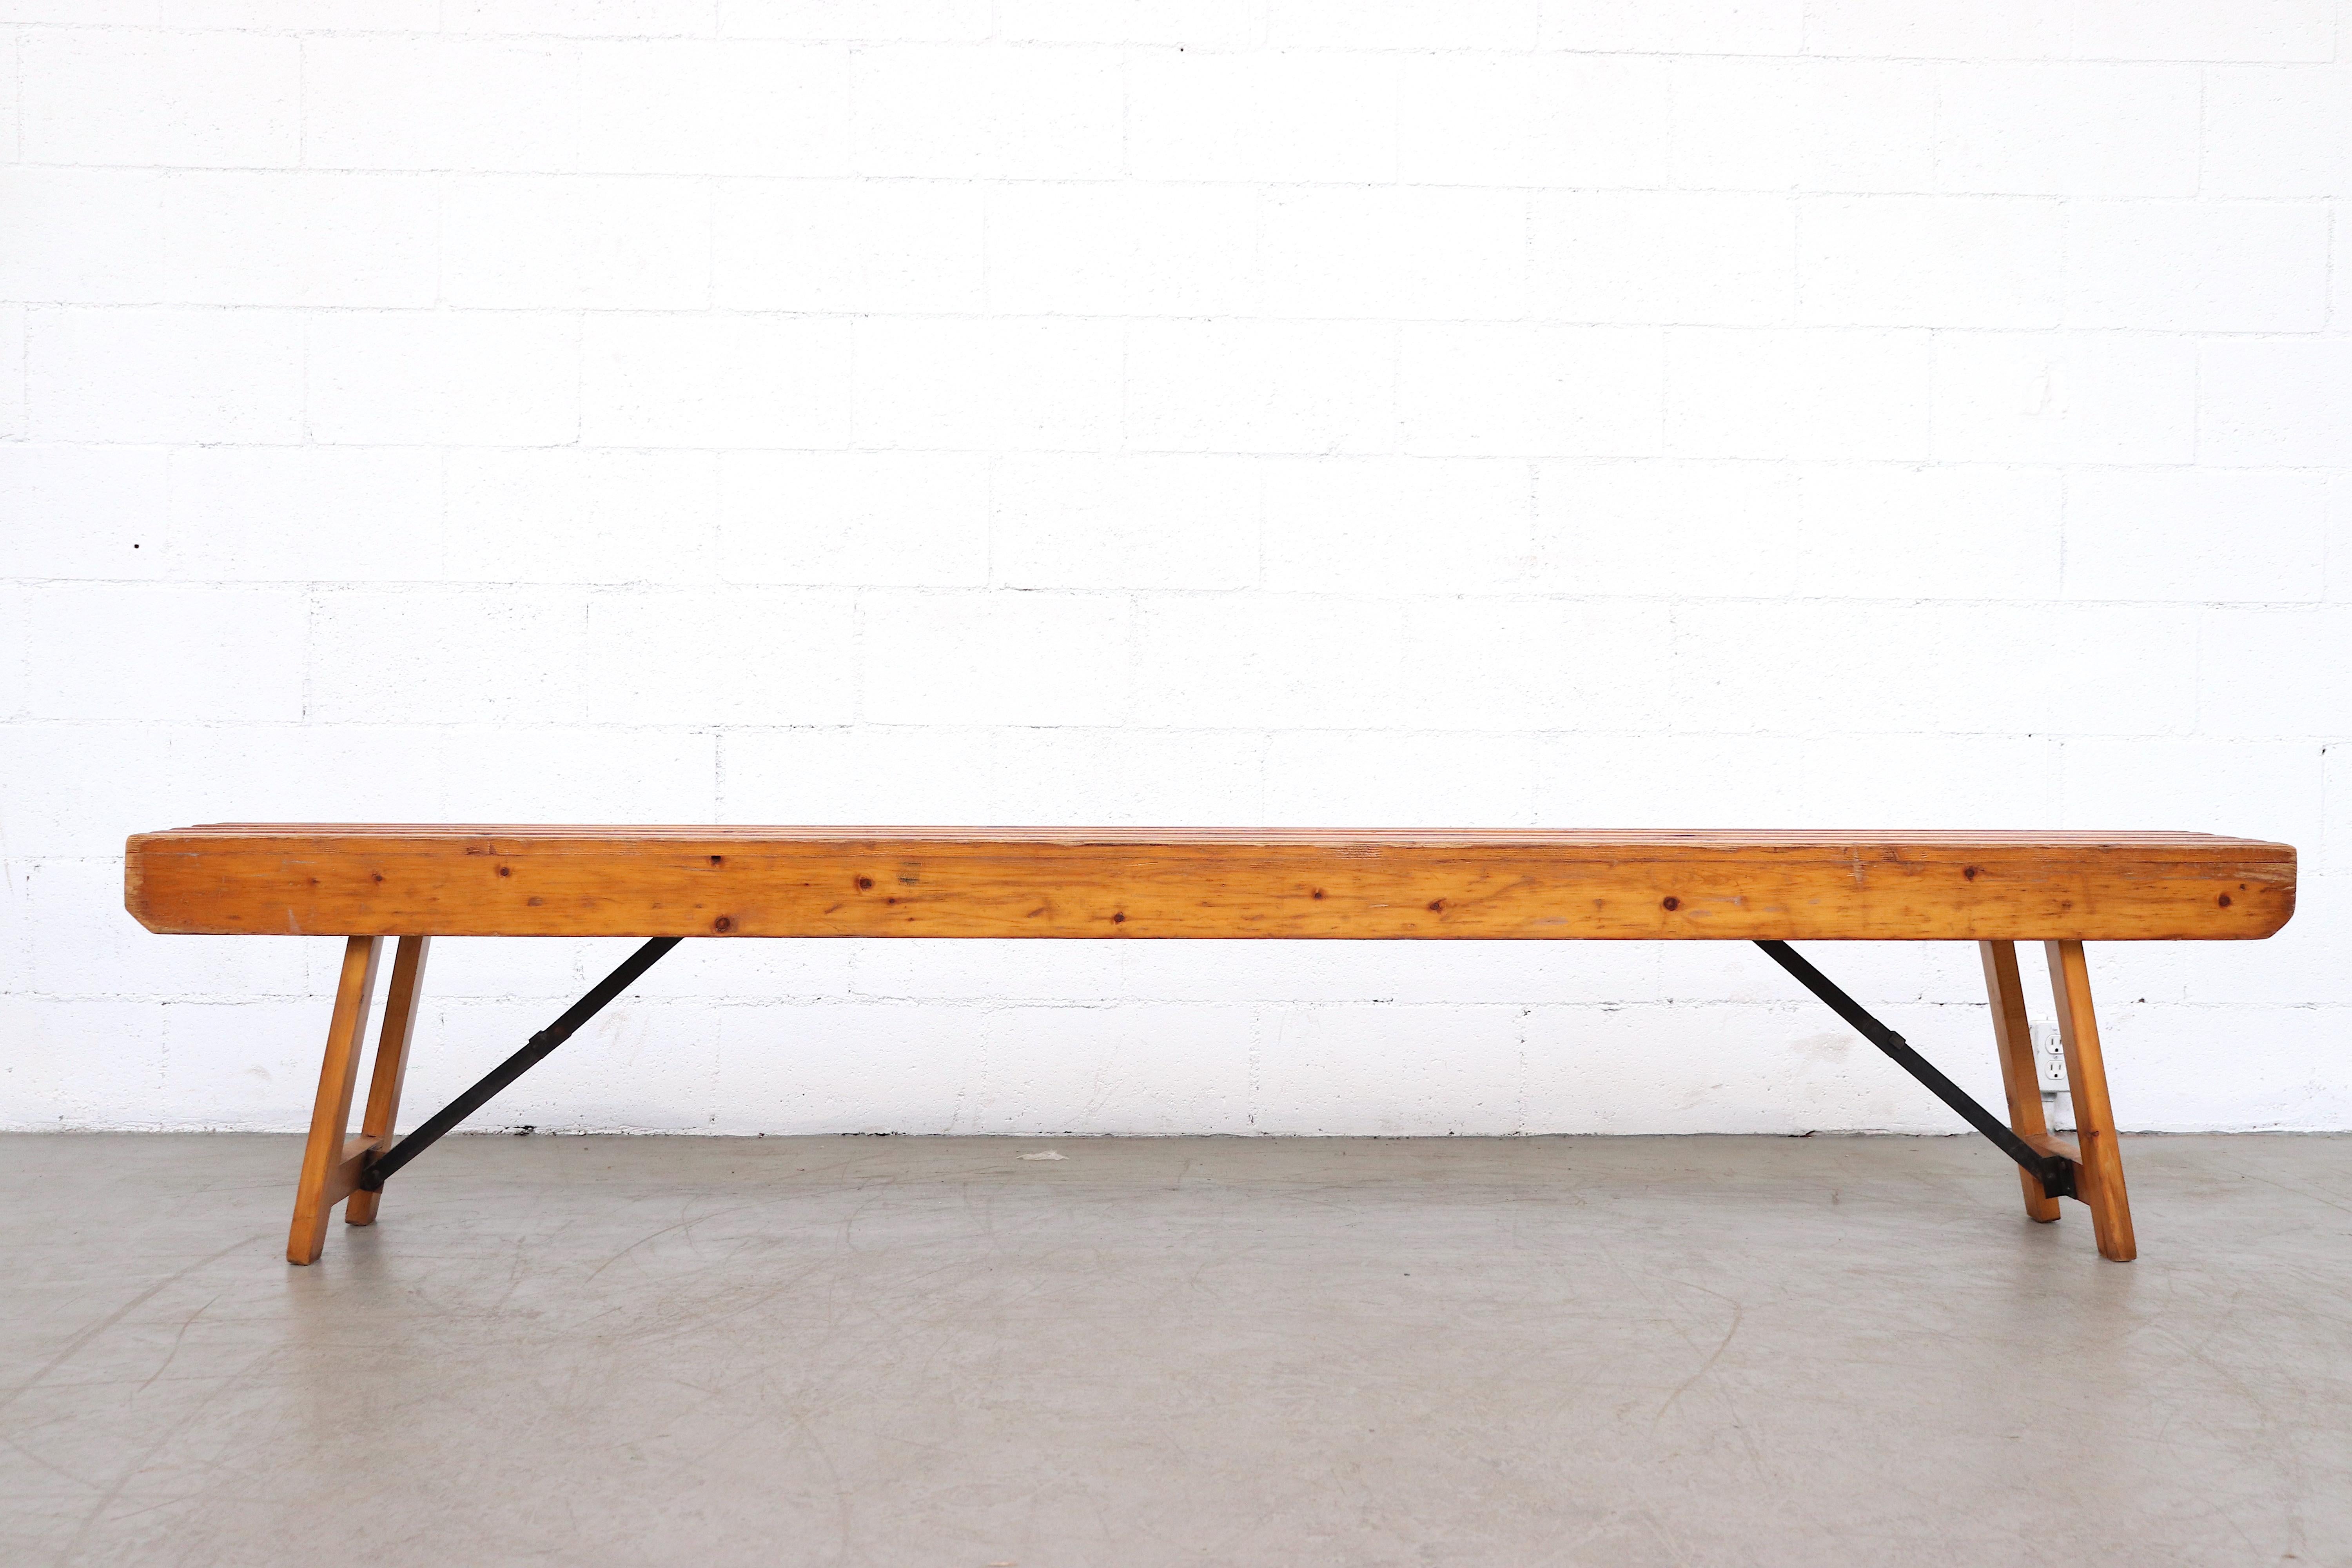 Excellent vintage folding wood slat bench from a Dutch post office. Beautiful patina. In original condition with some visible signs of wear consistent with age and use. 3 available in varying degrees of wear.